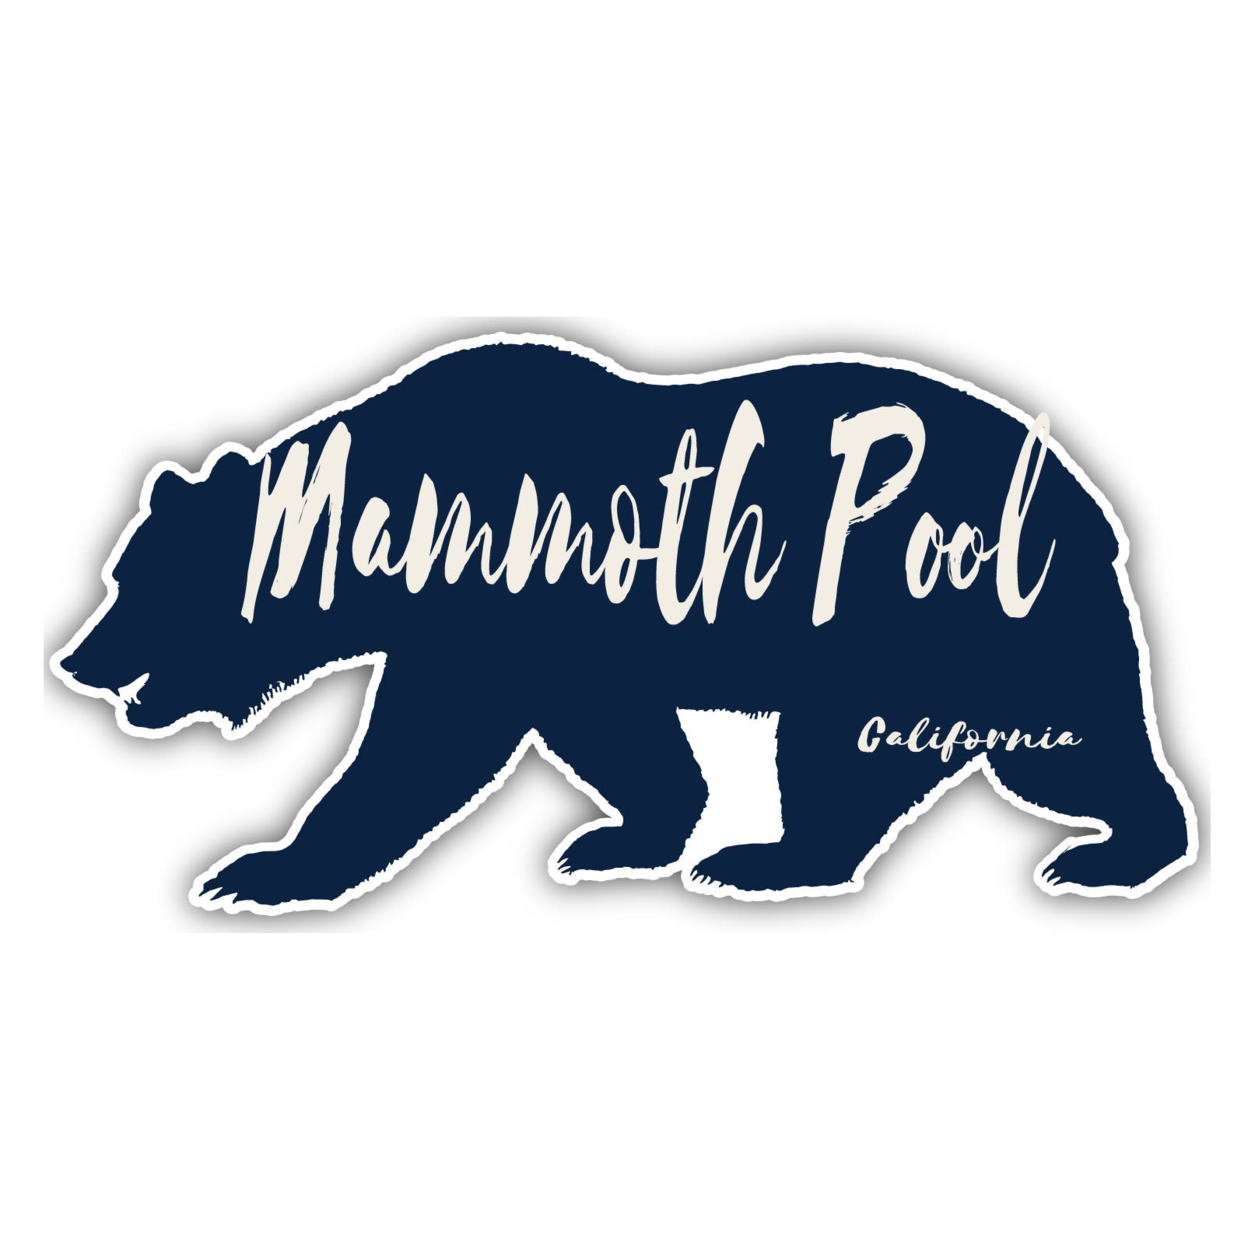 Mammoth Pool California Souvenir Decorative Stickers (Choose Theme And Size) - 4-Inch, Bear